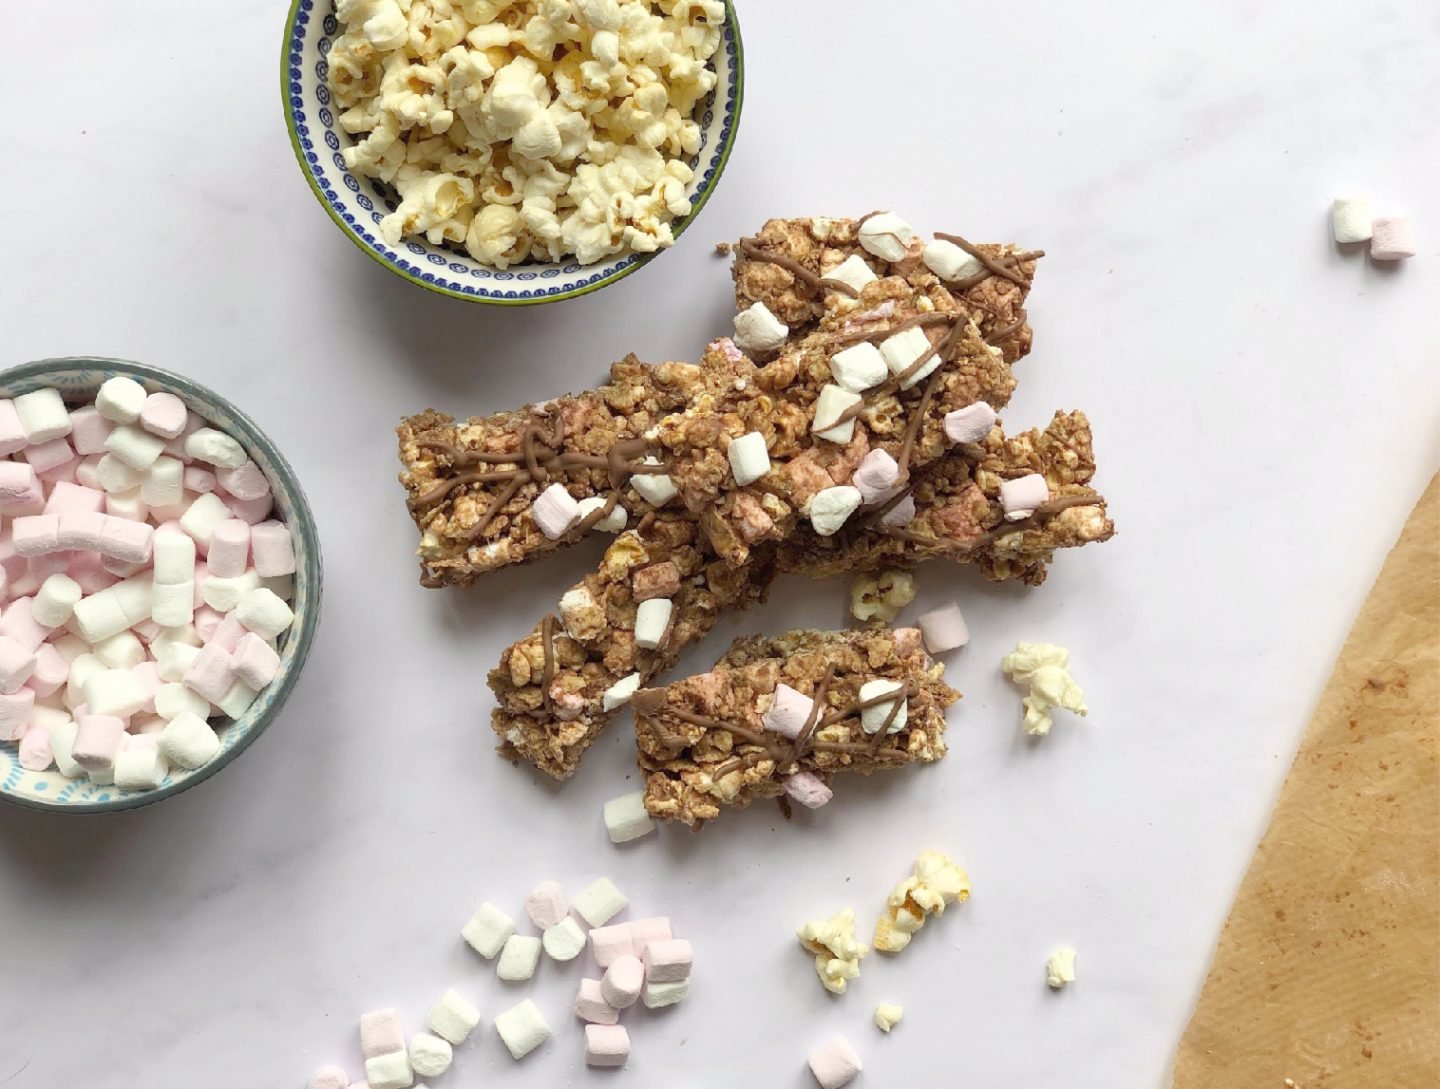 How to make homemade snack bars for a family treat